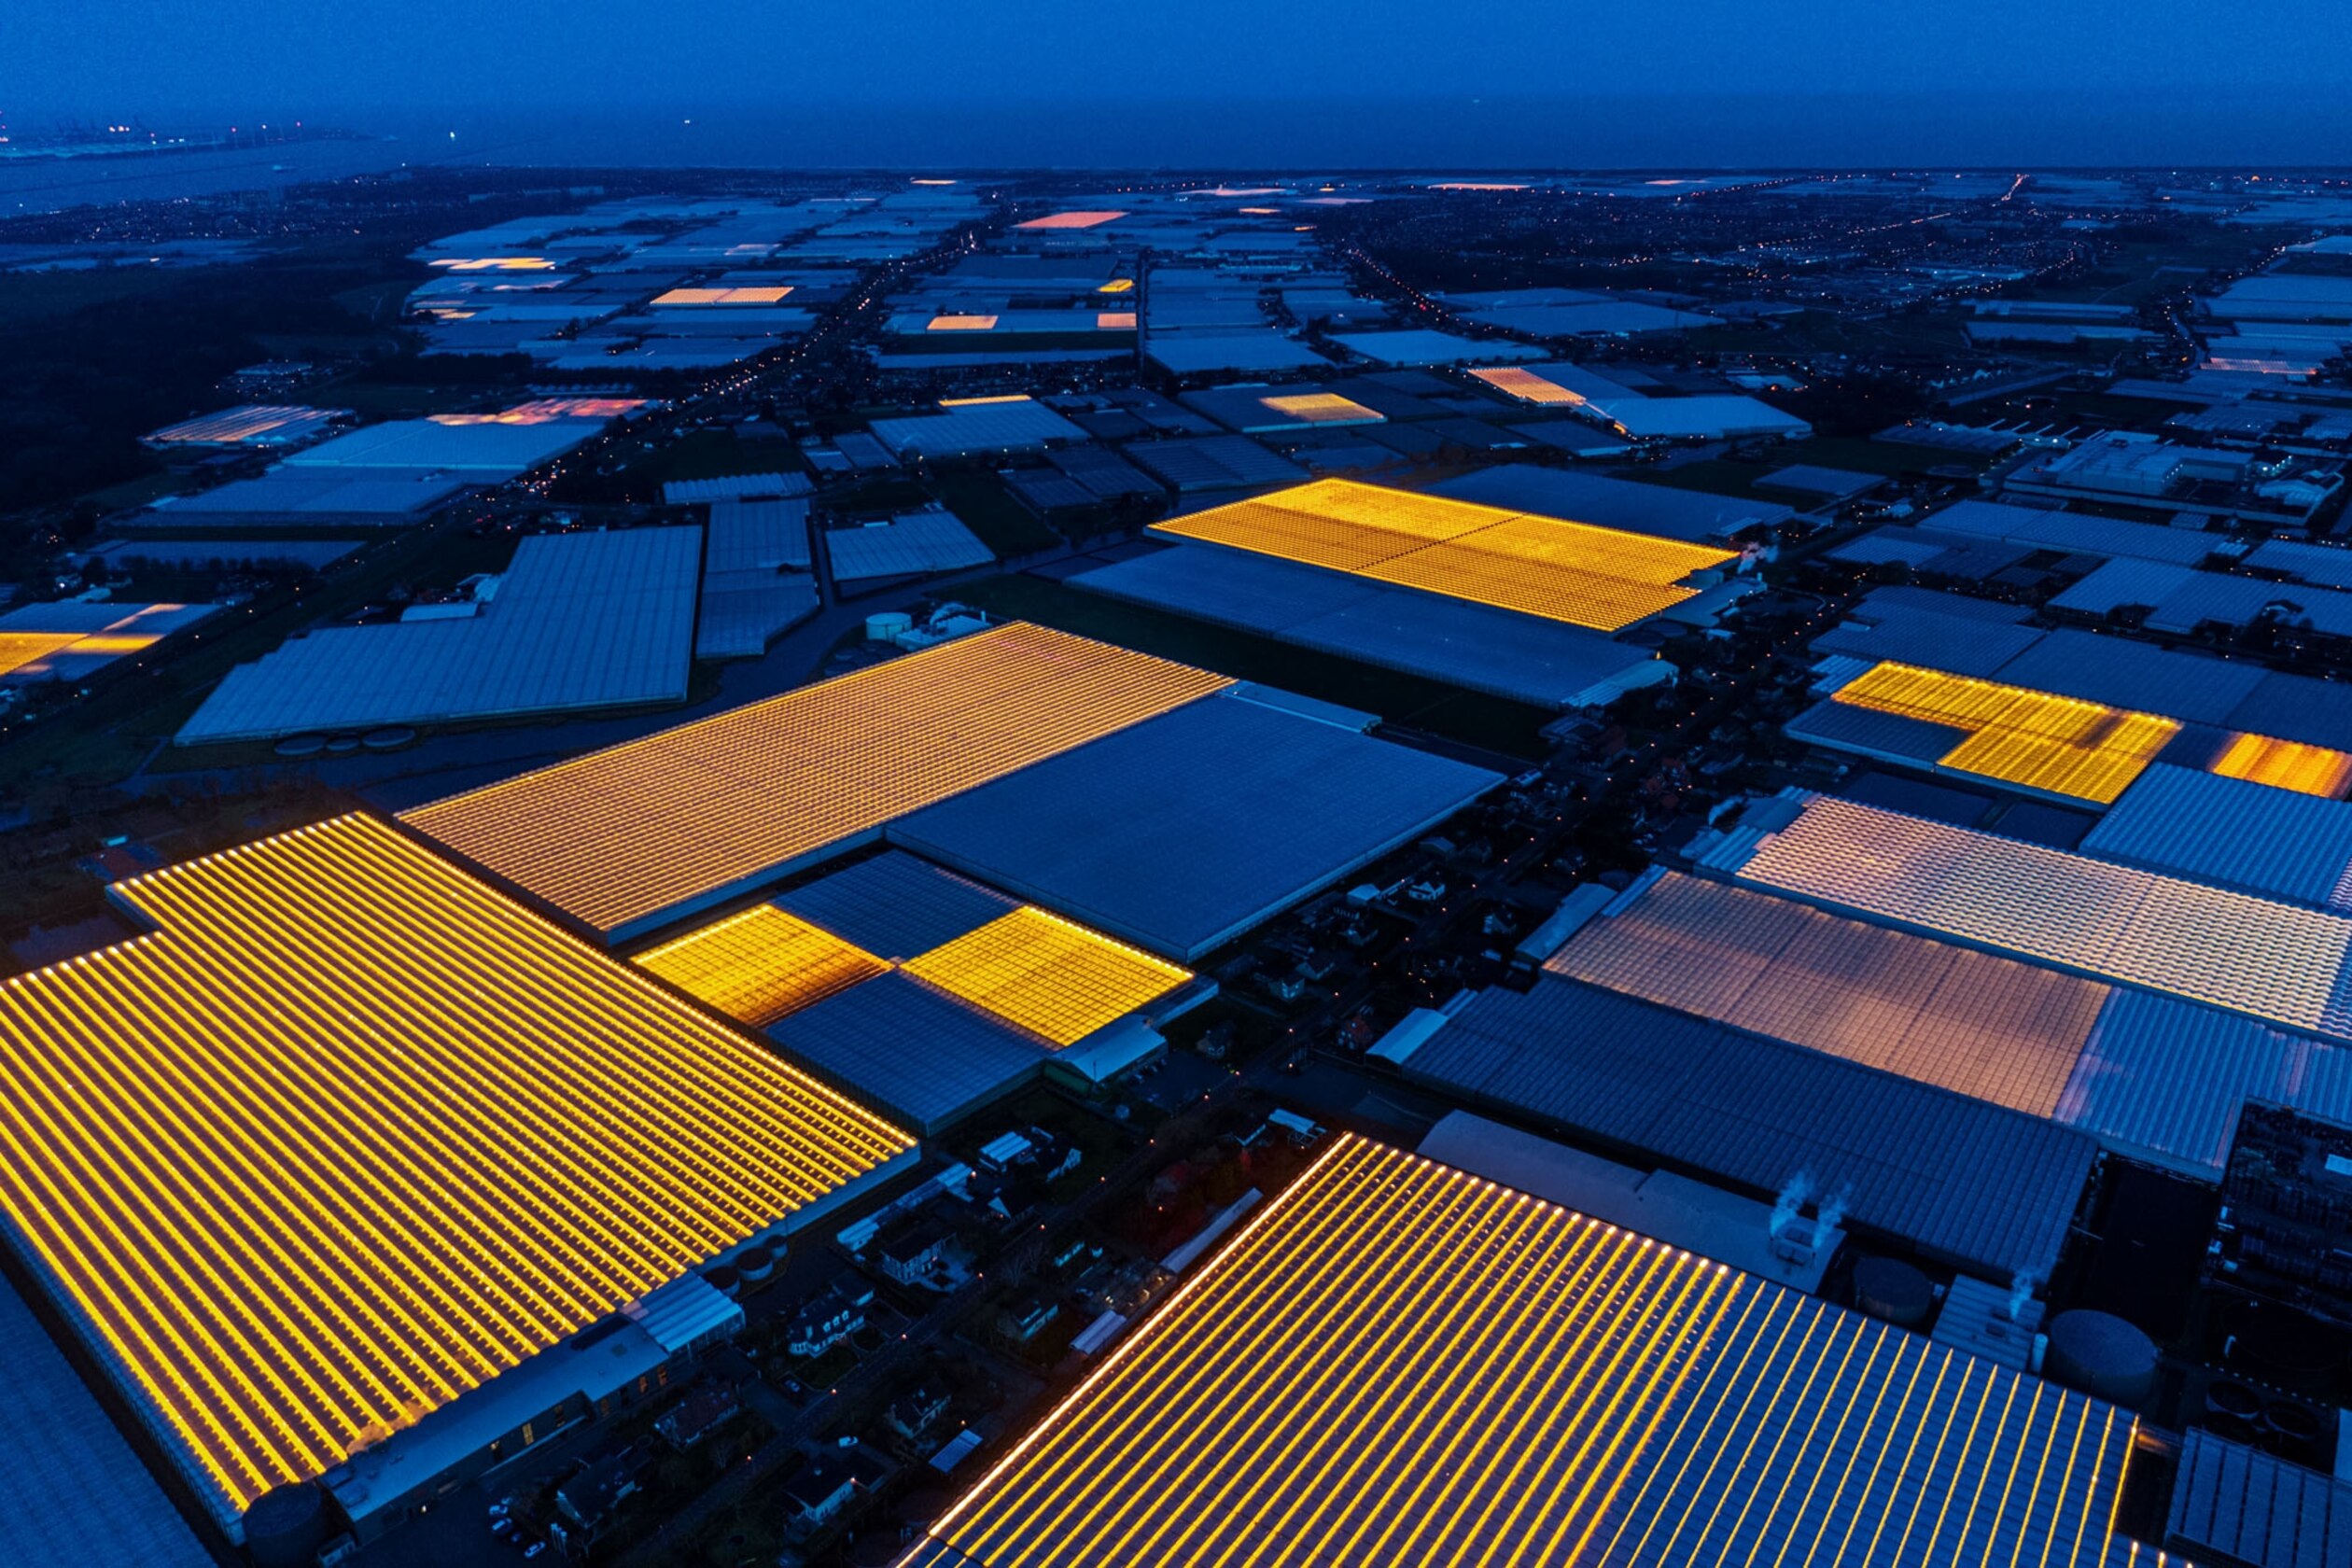 a nighttime view of greenhouses lit bright yellow